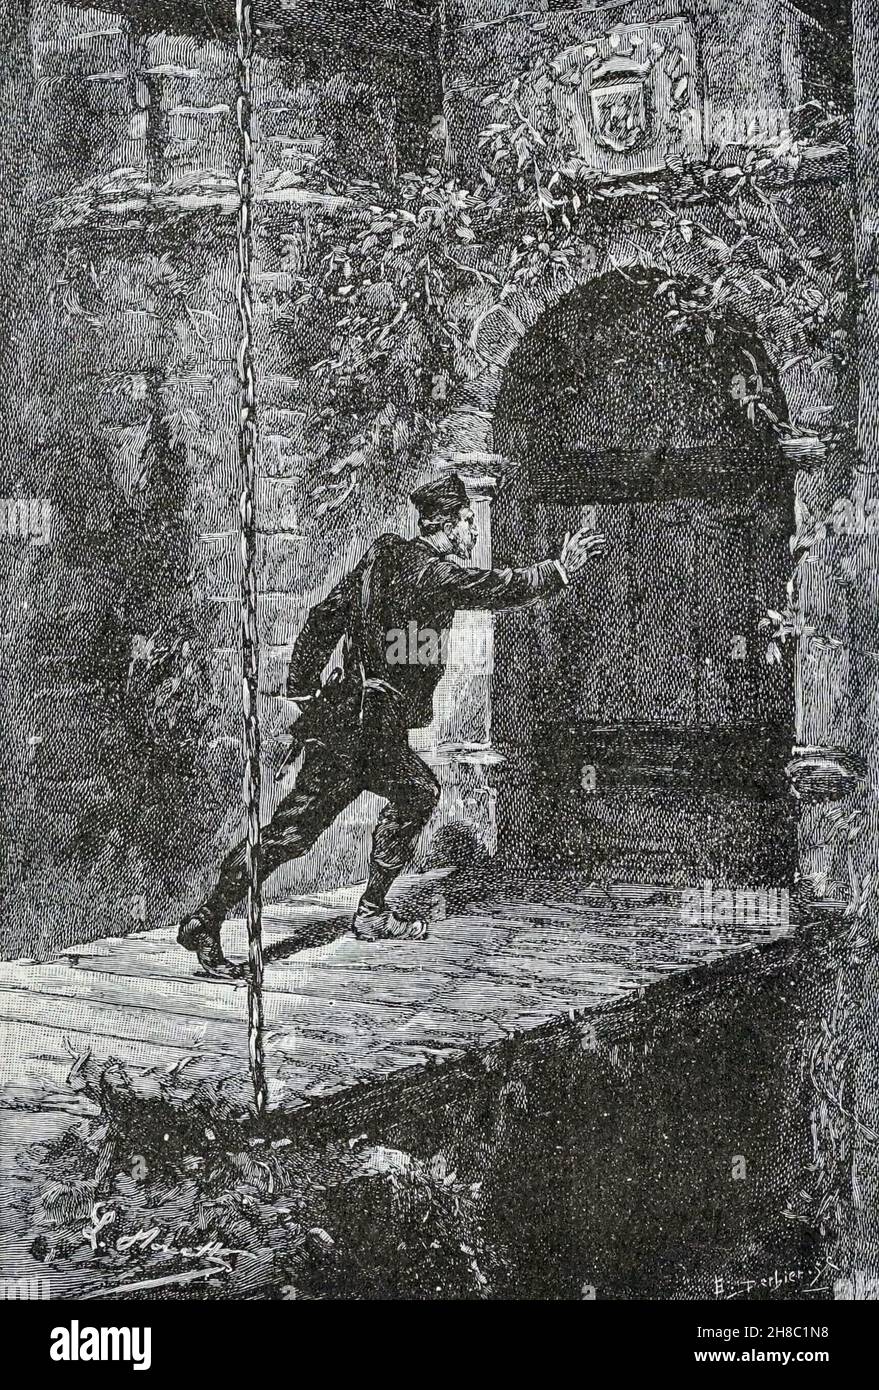 The drawbridge was down from ' The Carpathian Castle ' (or The castle of the Carpathians) by Jules, Verne, 1828-1905. May have been the inspiration for Dracula, Published in New York, by Merriam in 1894 In the village of Werst in the Carpathian mountains of Transylvania, some mysterious things are occurring and the villagers believe that Chort (the devil) occupies the castle. A visitor to the region, Count Franz de Telek, is intrigued by the stories and decides to go to the castle and investigate. He finds that the owner of the castle is Baron Rodolphe de Gortz, with whom he is acquainted; yea Stock Photo